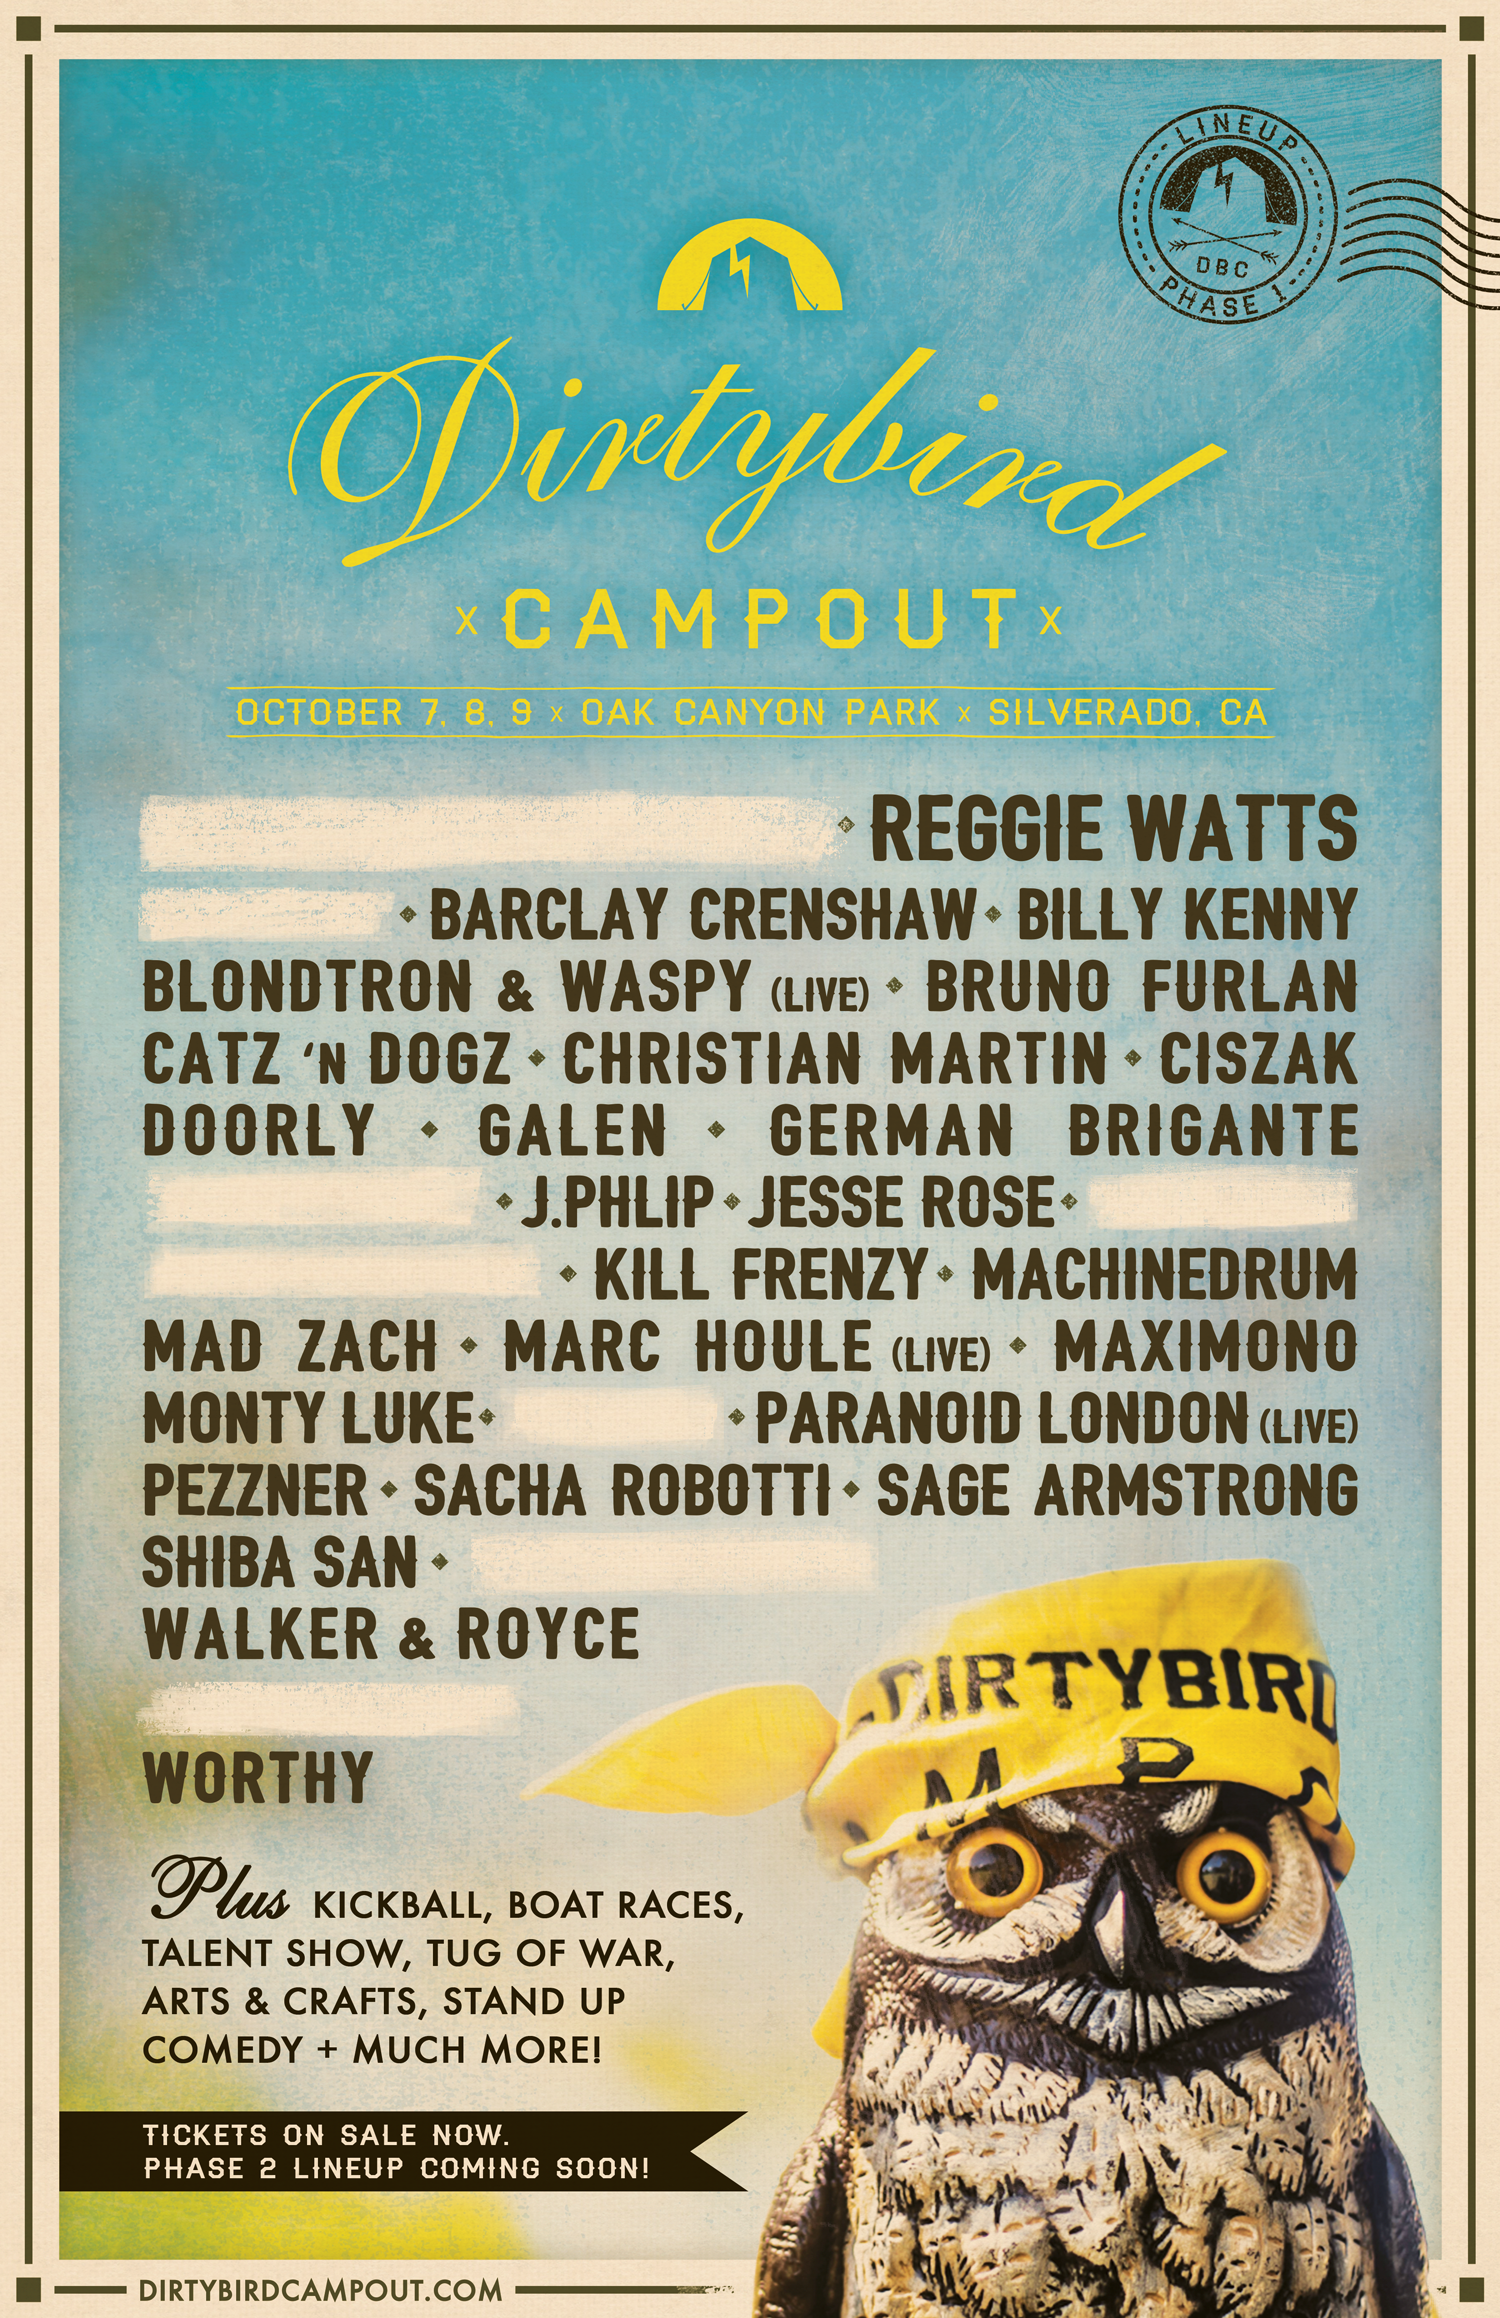 [Festivals] Dirtybird Campout Releases Second Annual Lineup Featuring Kill Frenzy, Reggie Watts, Special Guests, and Many More